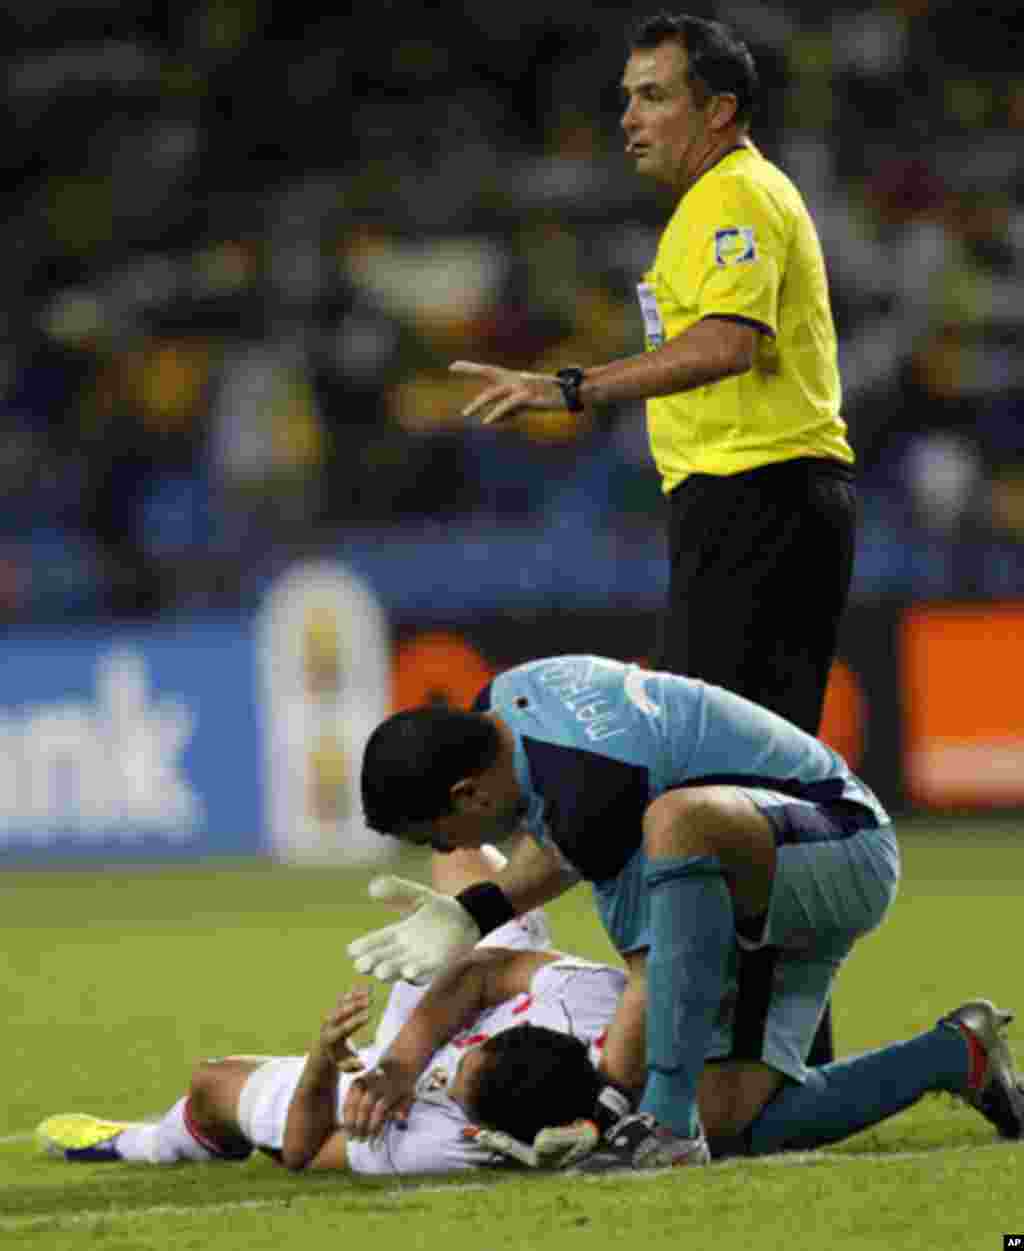 Tunisia's goalkeeper Mathlouthi Ayem attends to injured teammate Jemal Ammar as referee Daniel Bennett from South Africa calls for assistance during their African Cup of Nations Group C soccer match against Morocco at Stade De L'Amitie Stadium in Librevil